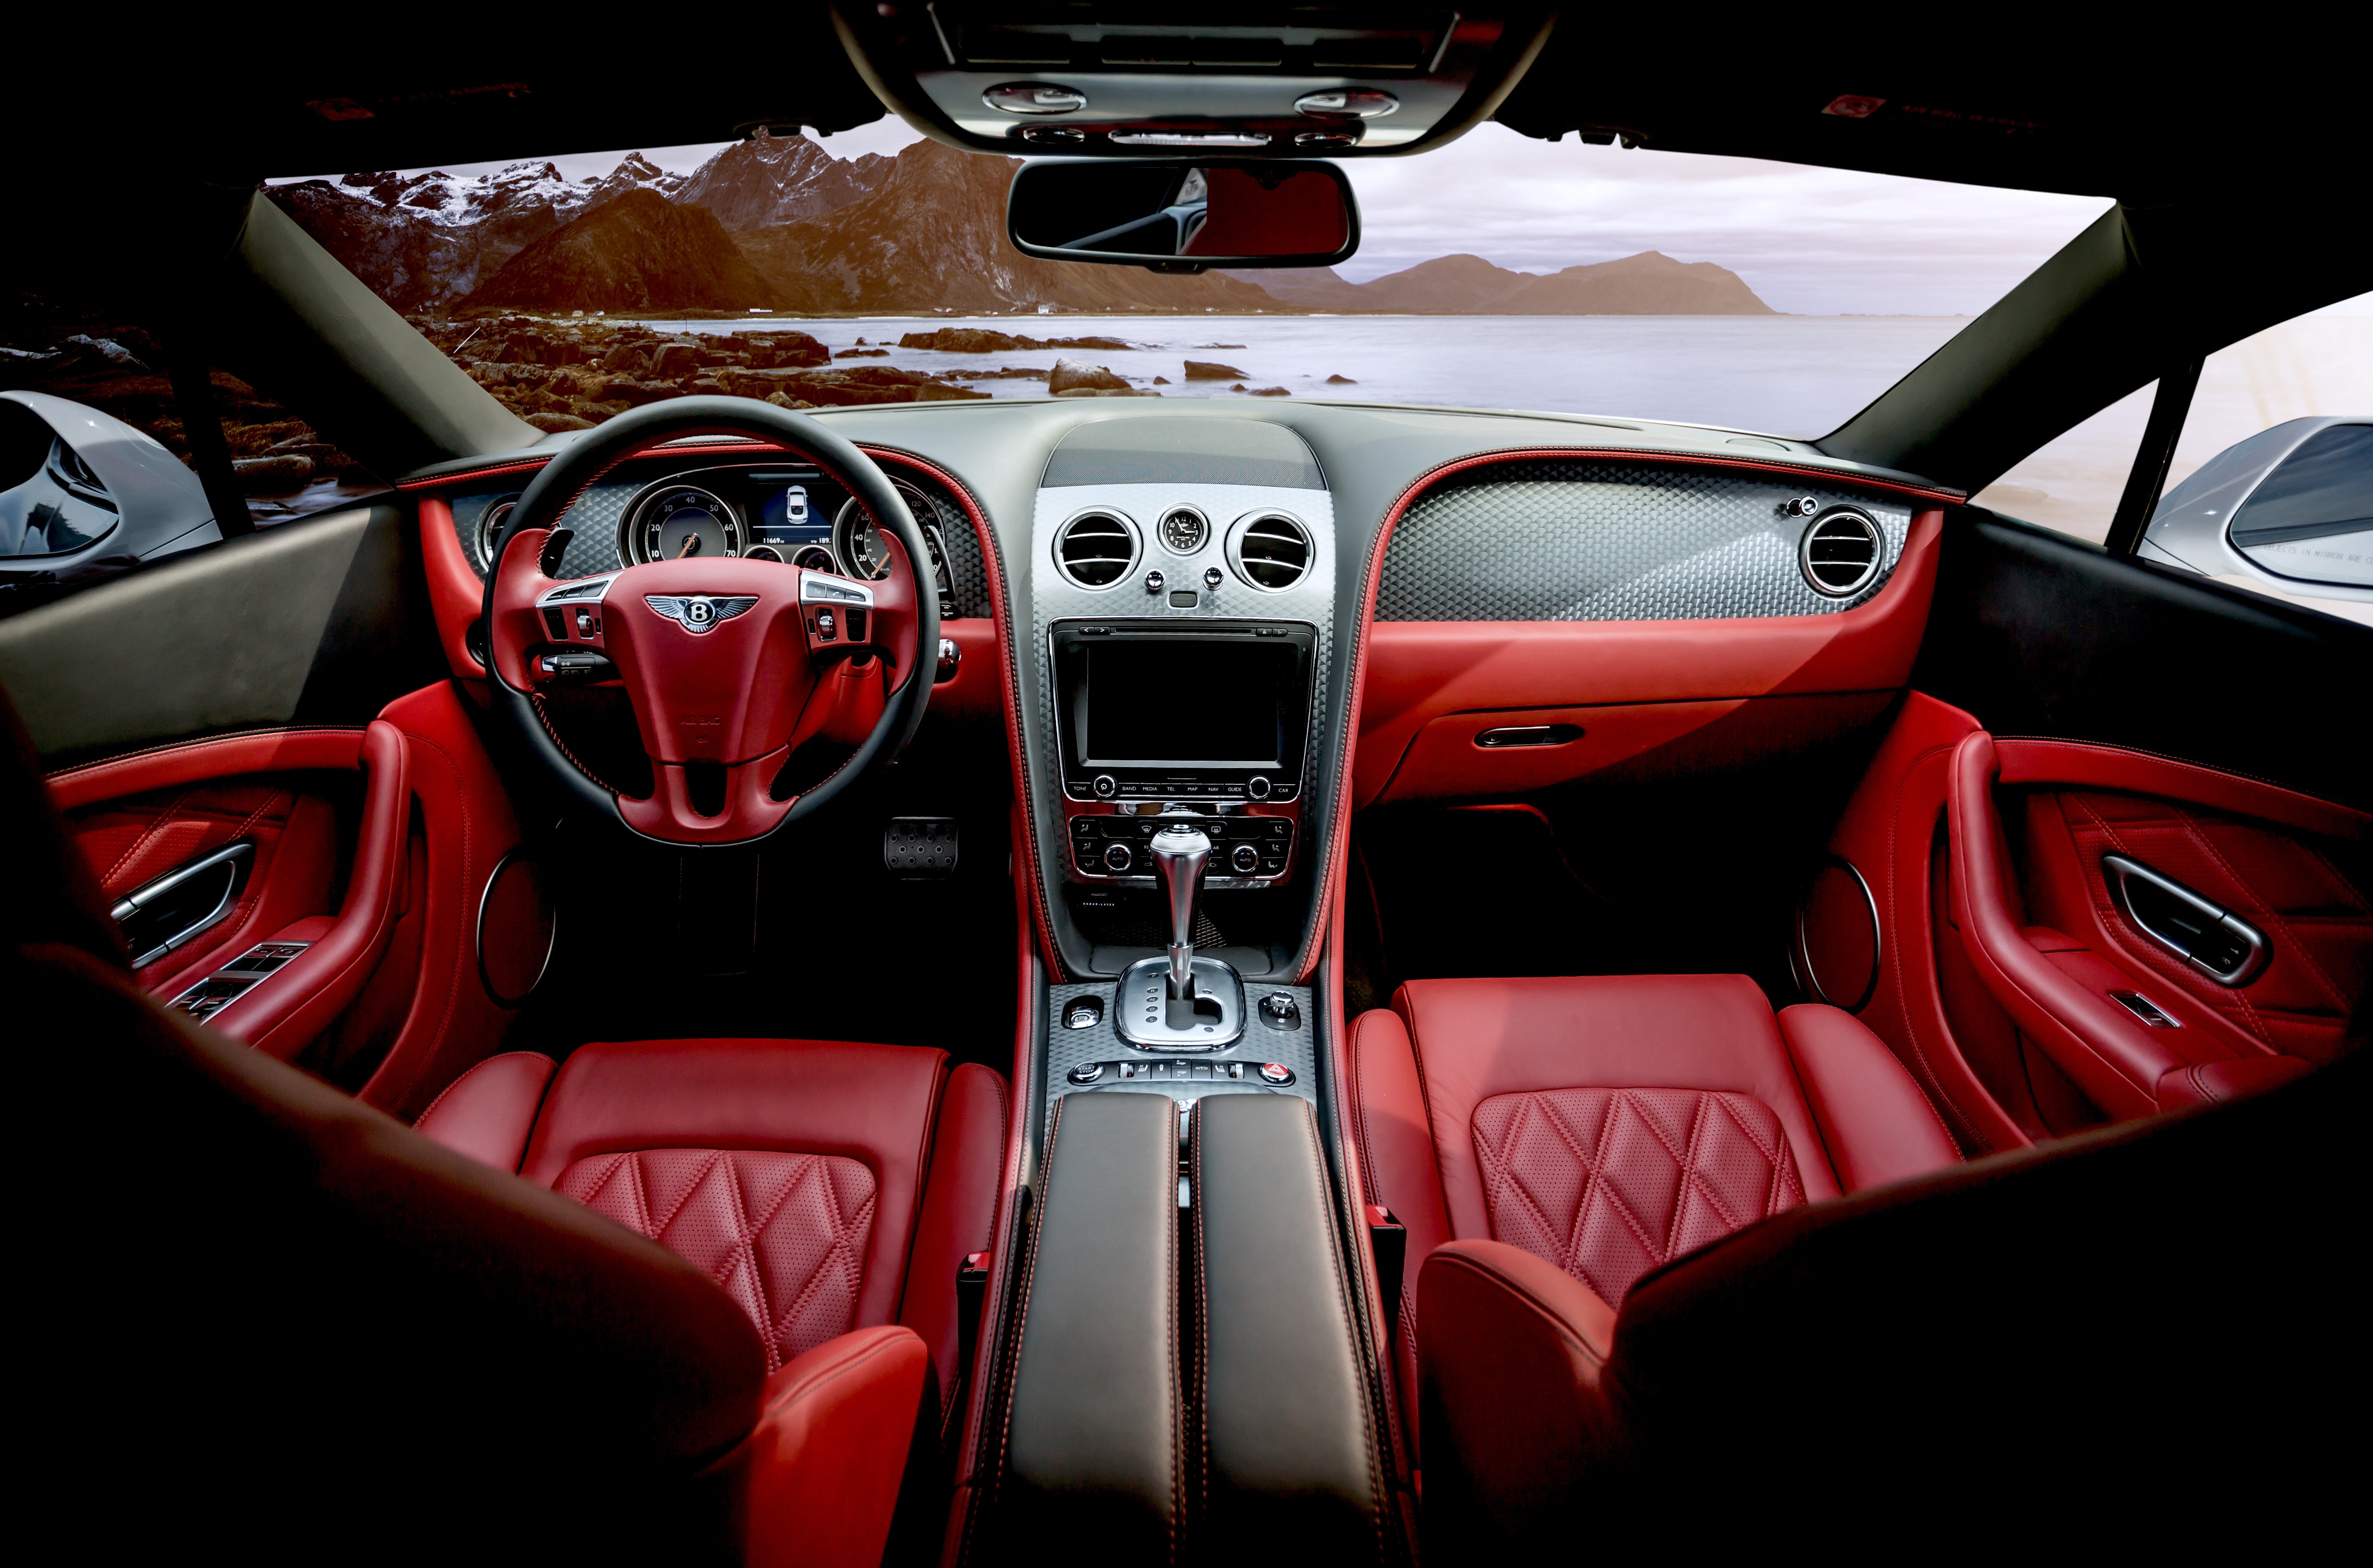 Car detailing makes the interior of your car neat and clean